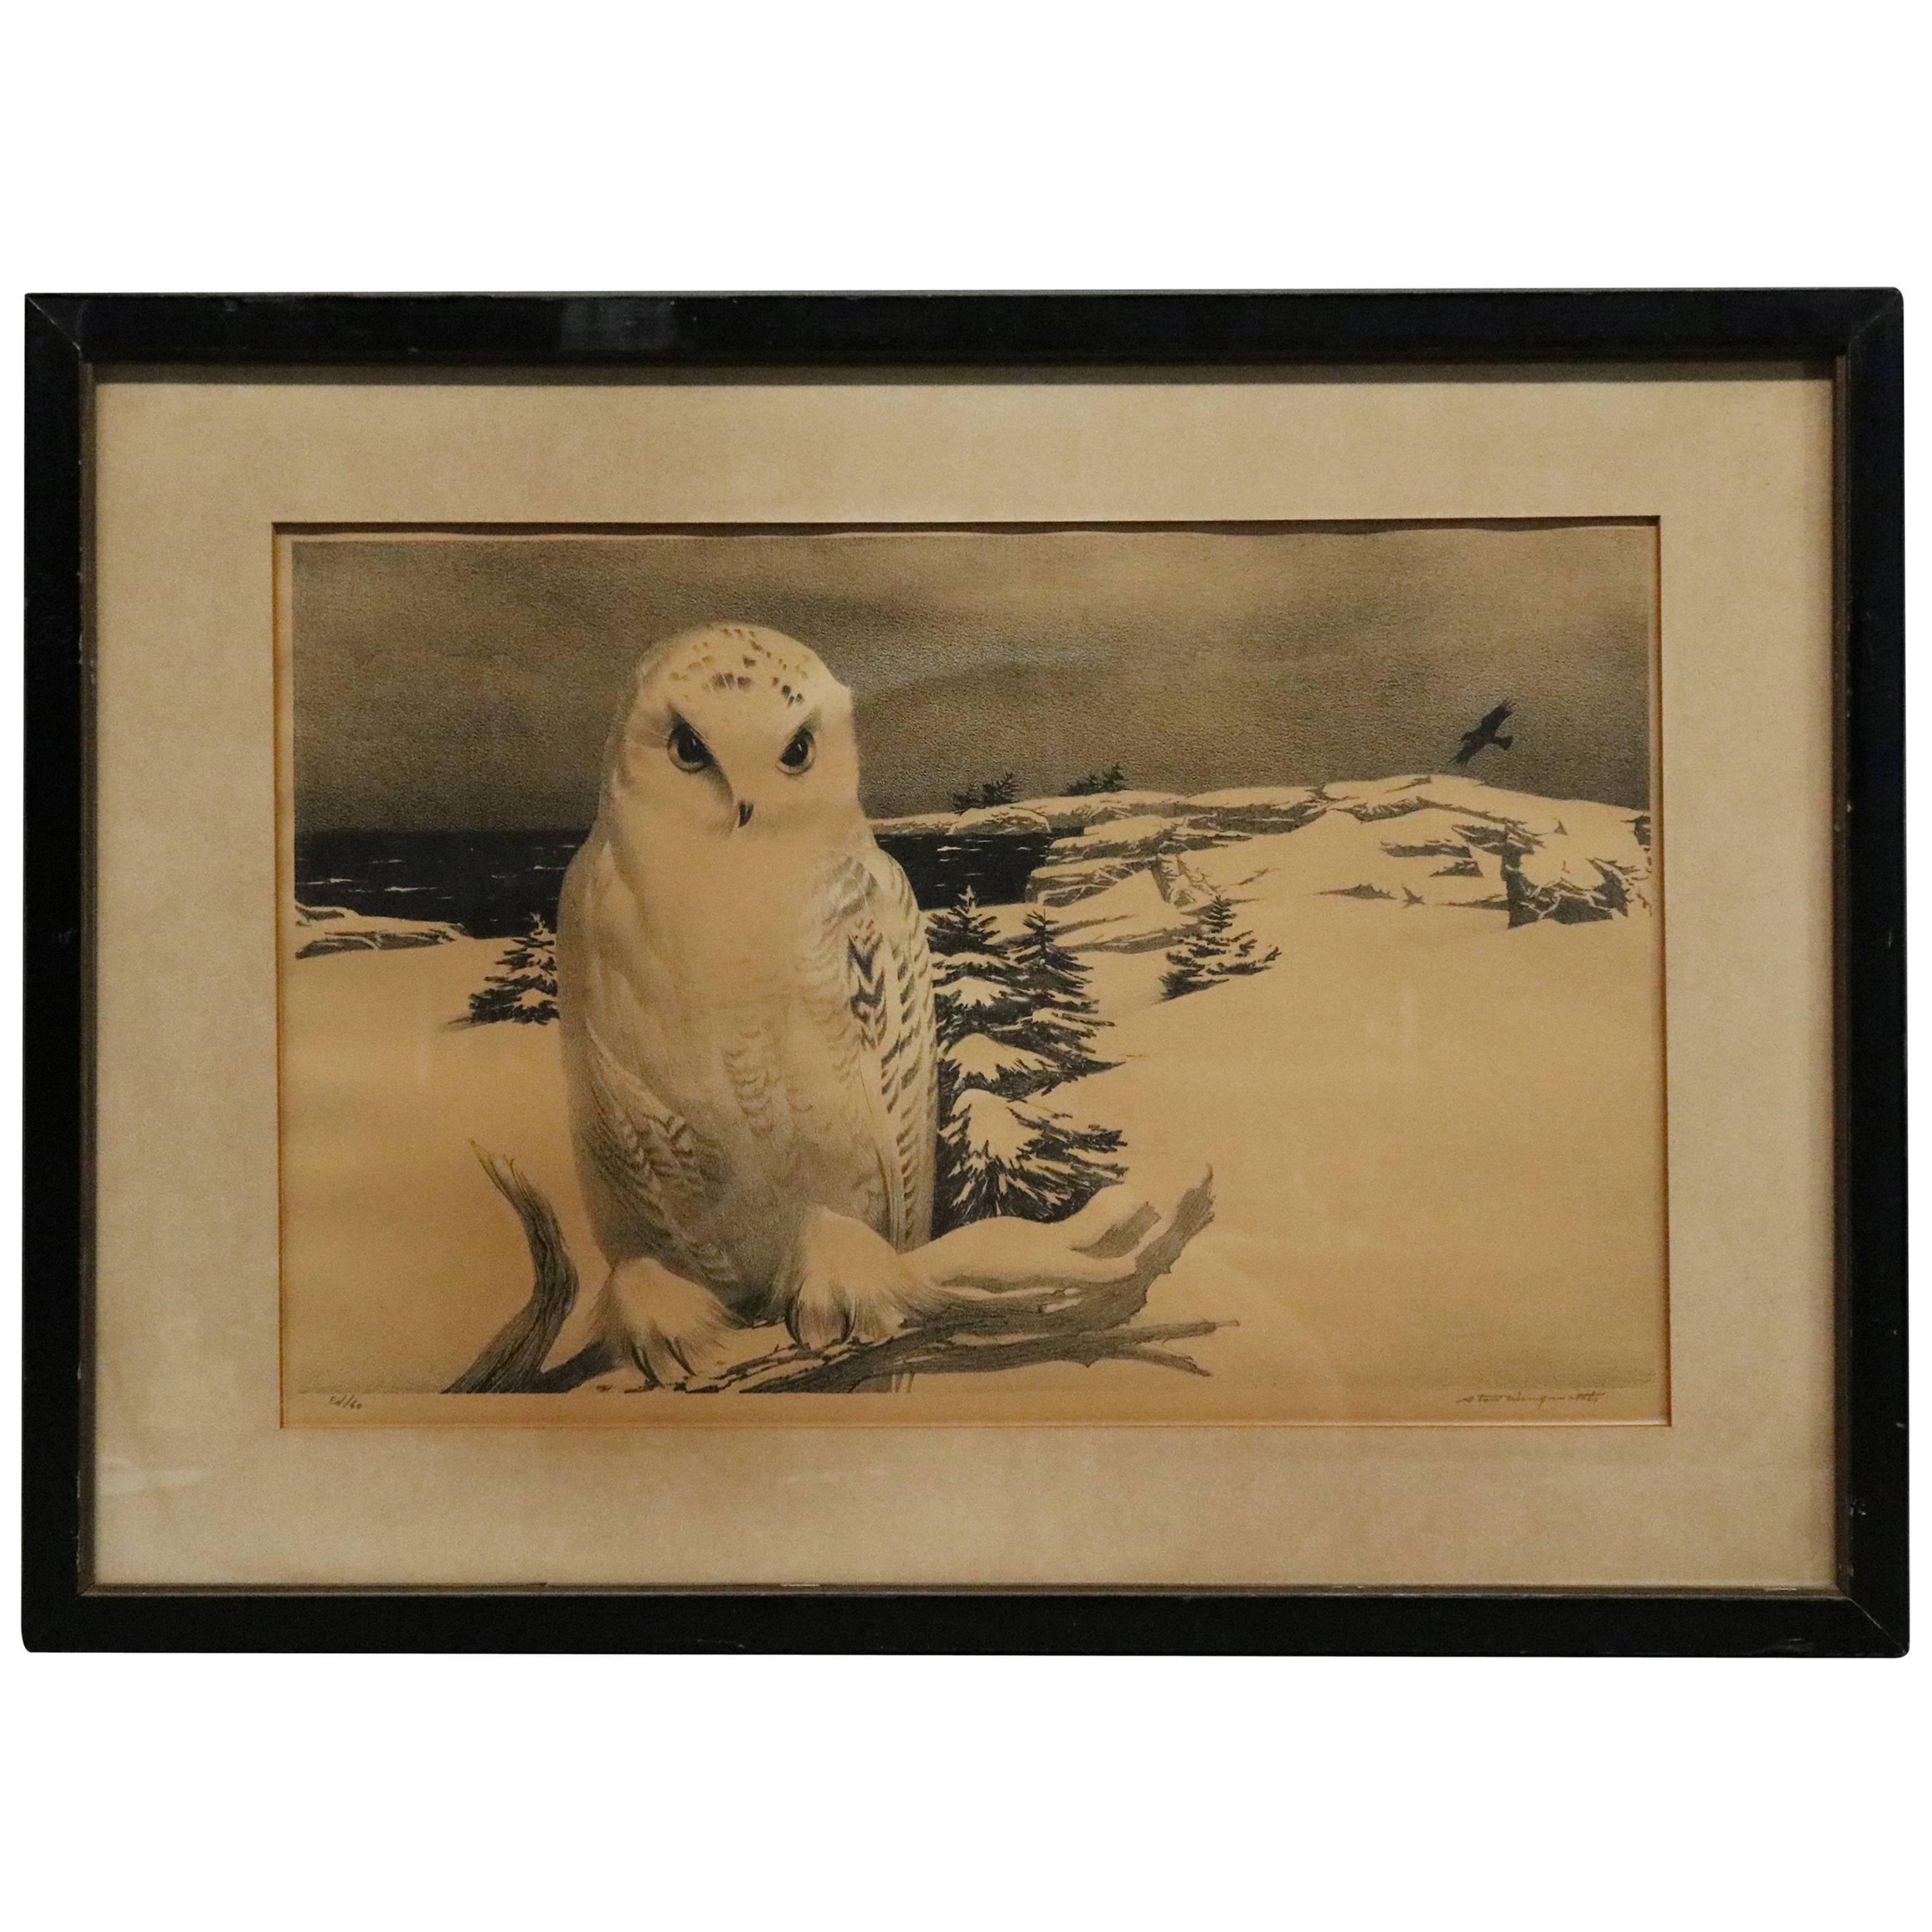 Antique Framed Lithograph of Snowy Owl by Stow Wengenroth, Signed & #'d, c1930